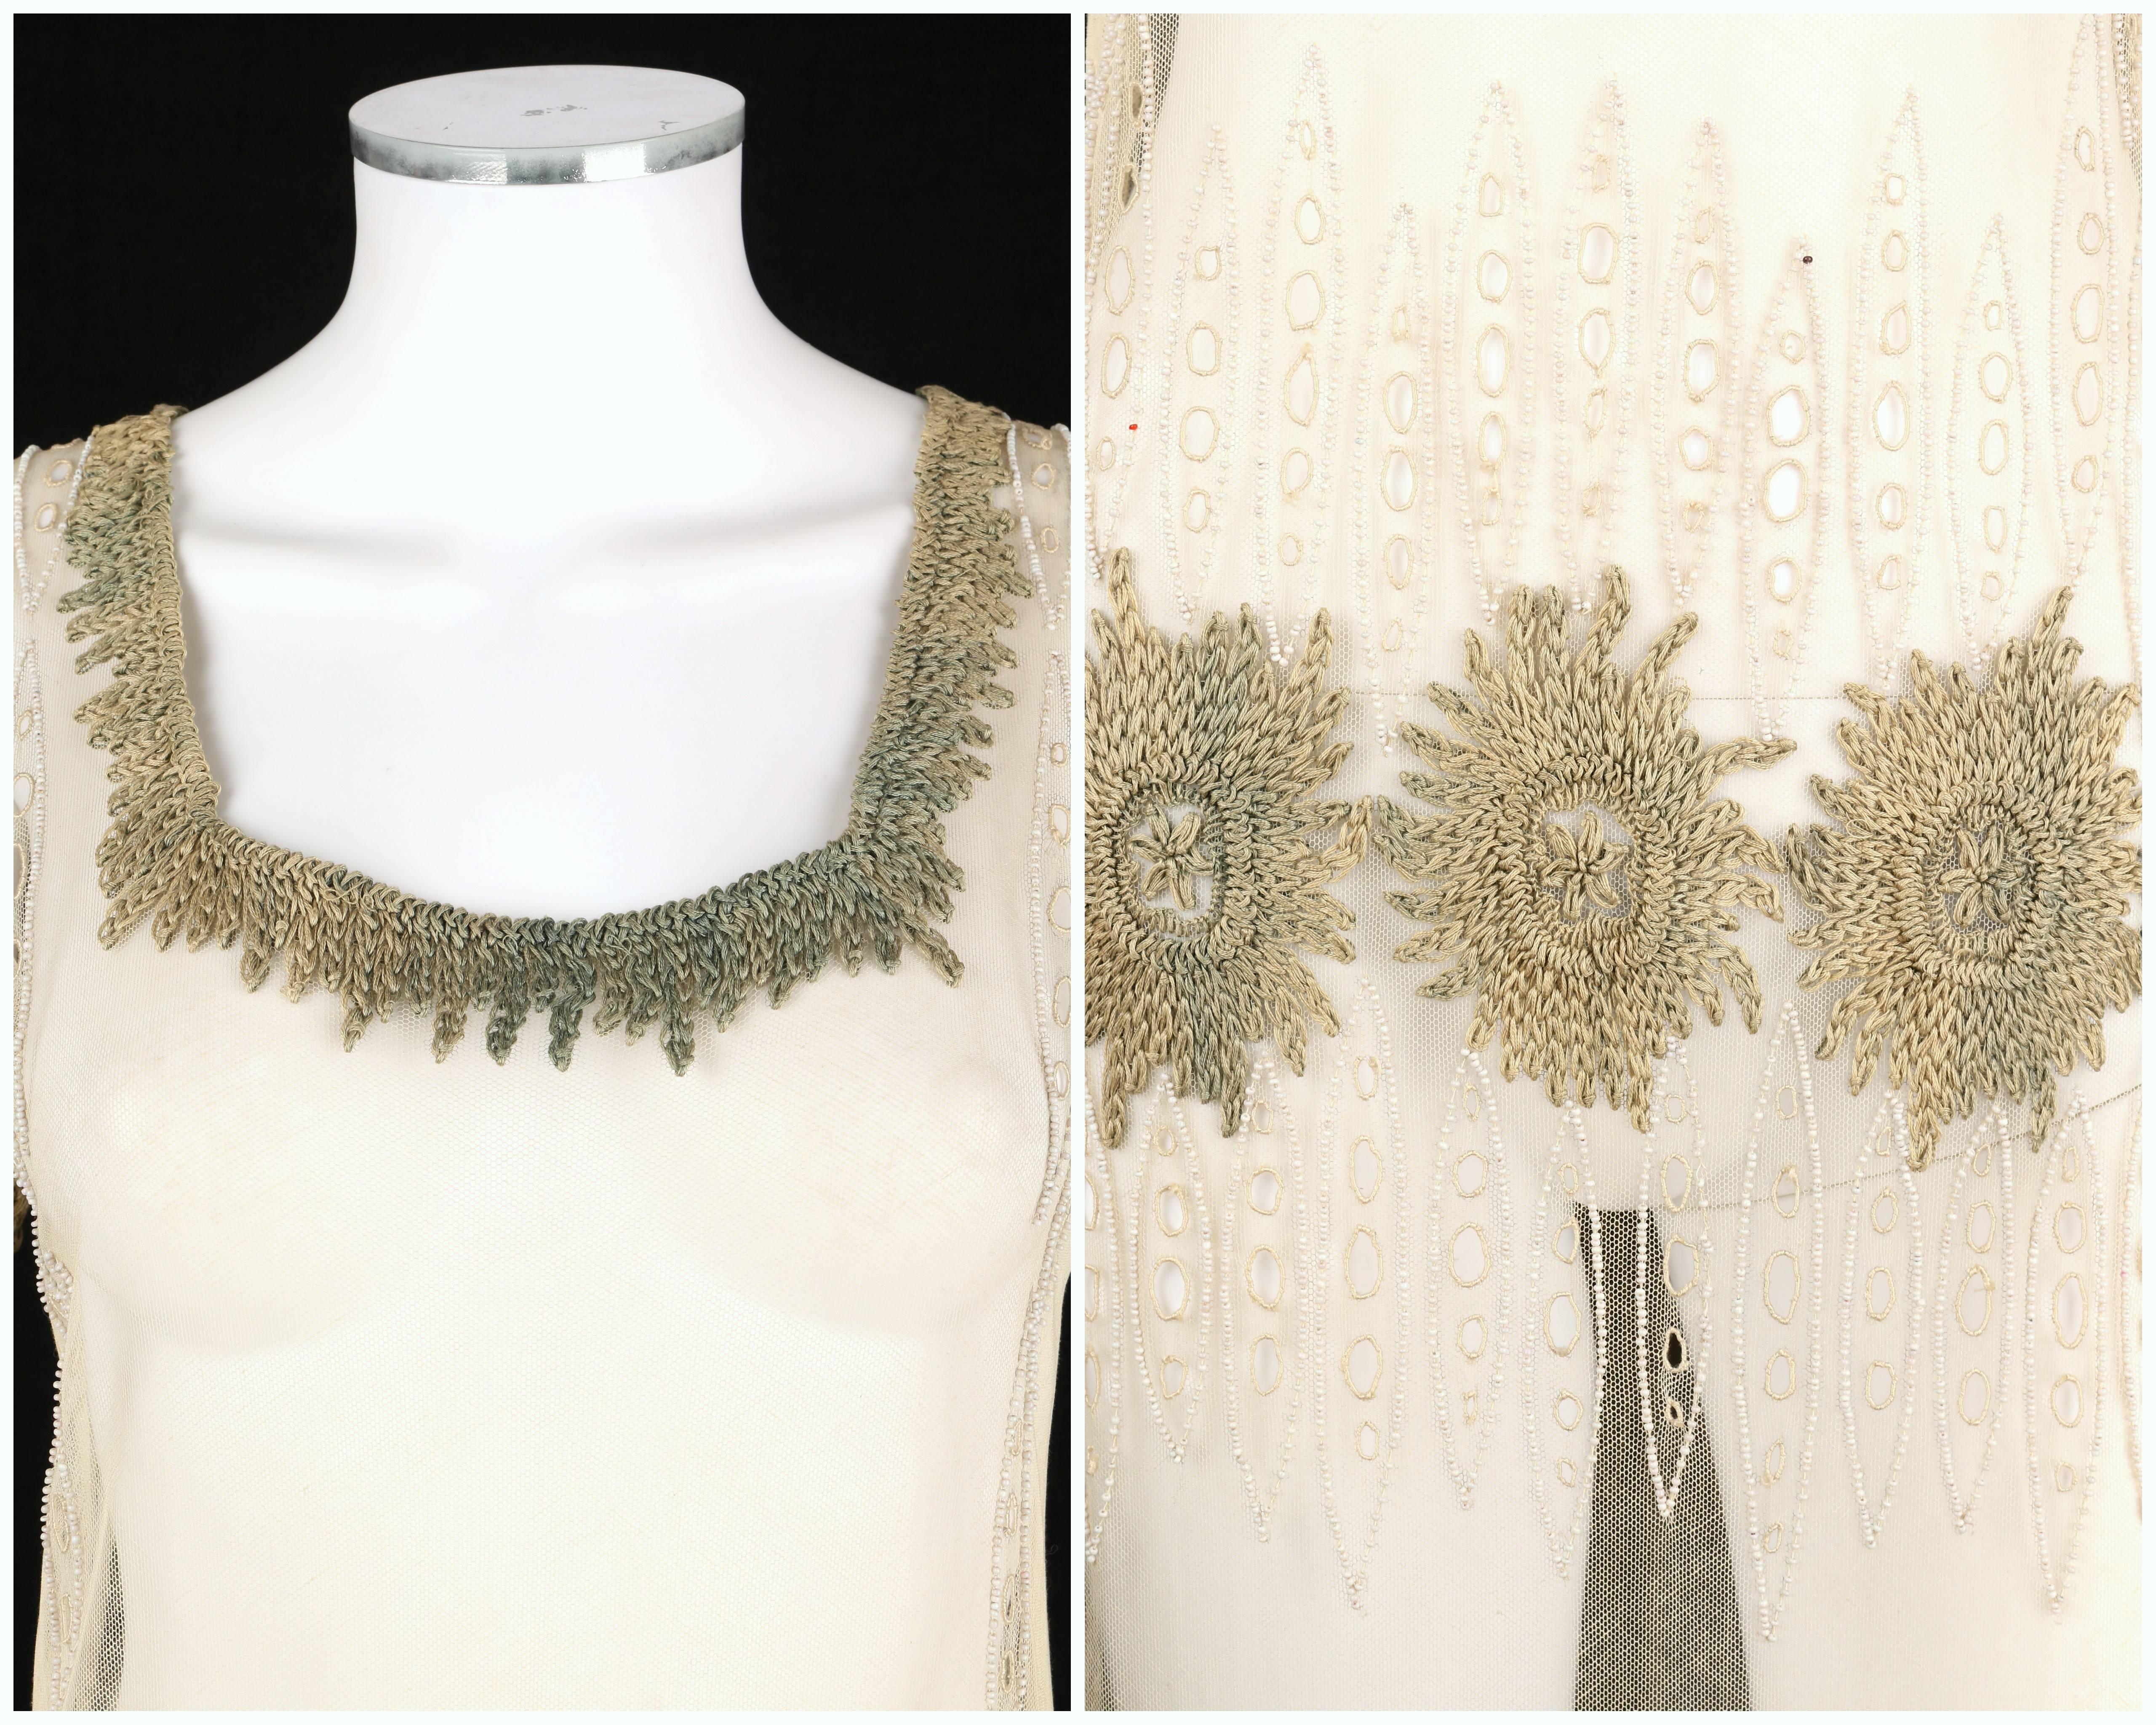 Women's COUTURE Edwardian c.1910's Ivory Floral Embroidered Beaded Mesh Tabard Overdress